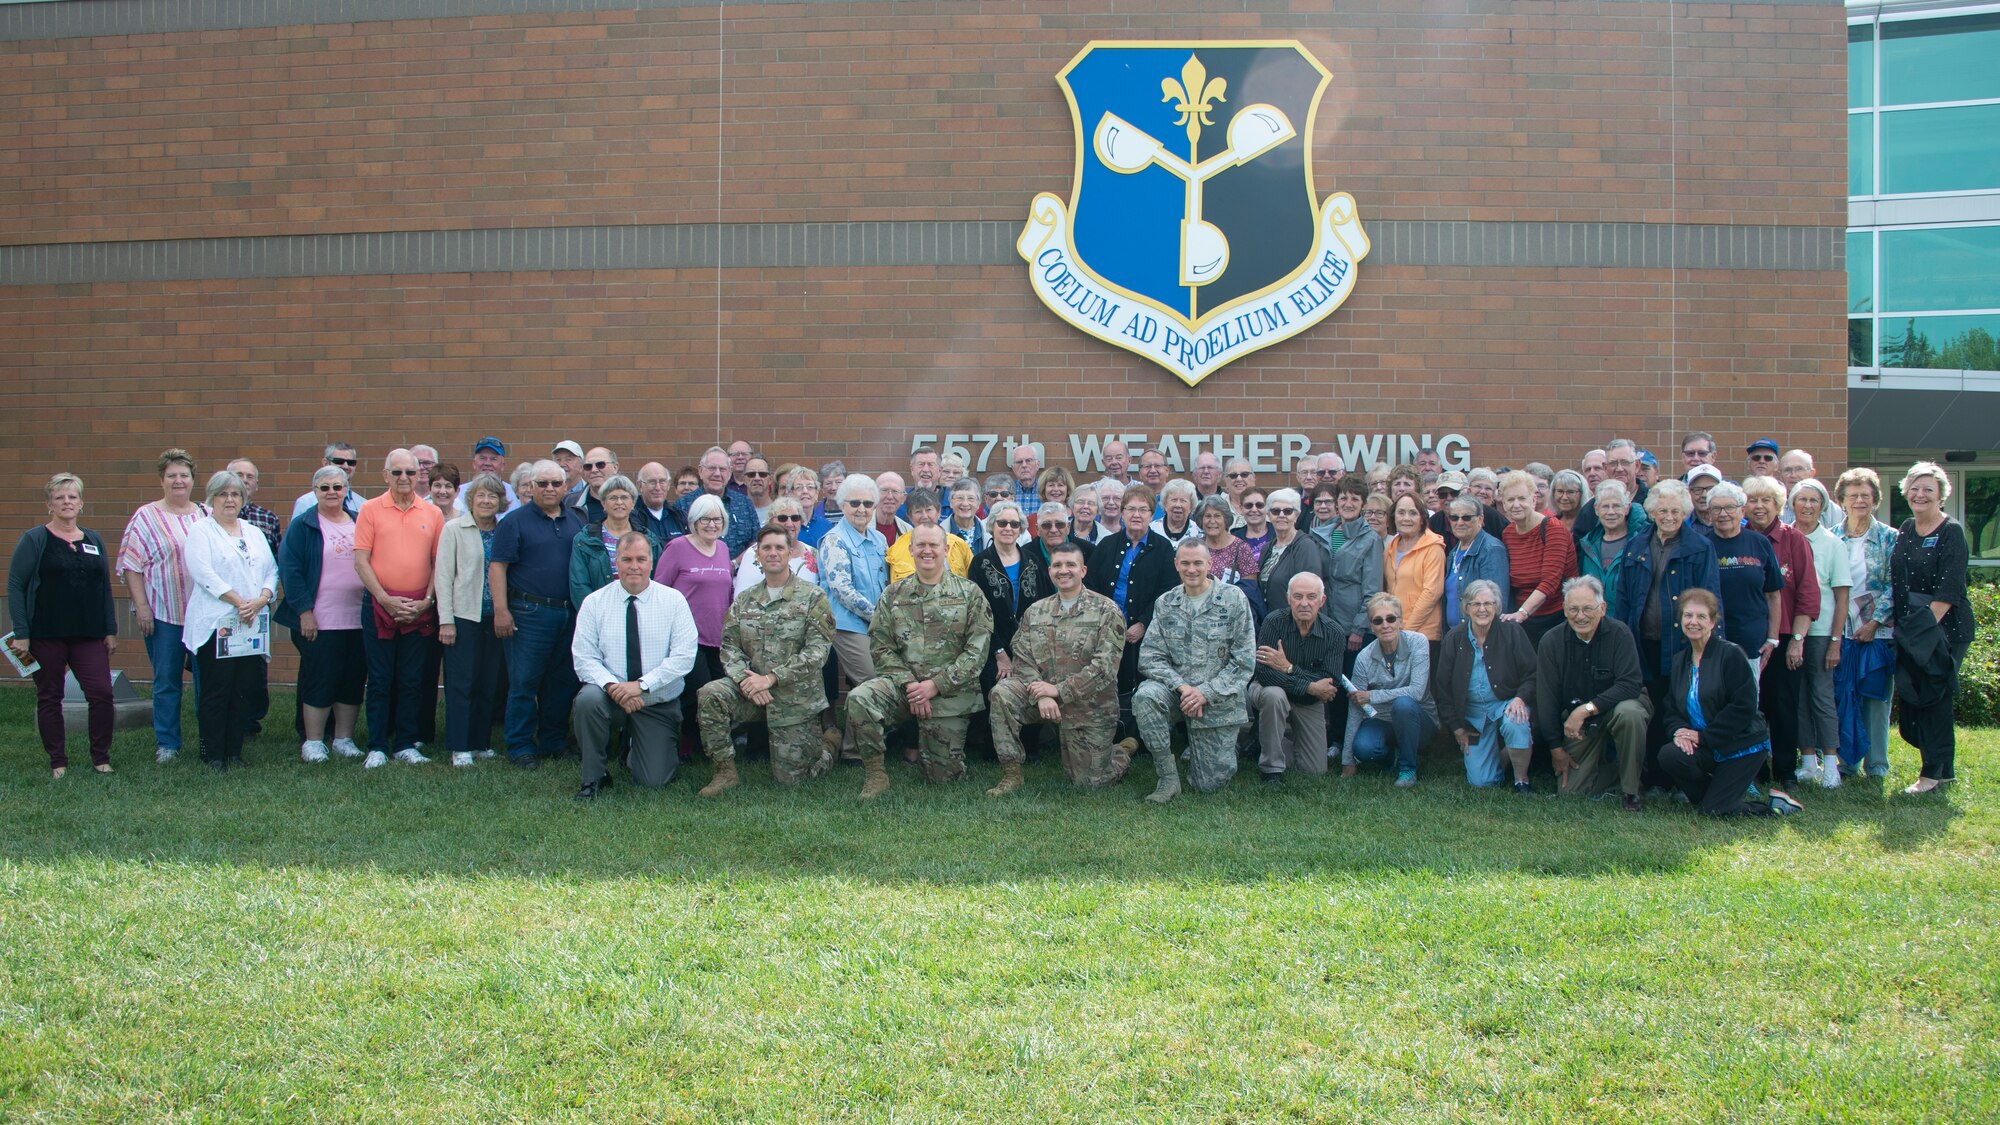 Visitors from Rochester, Minnesota, pose for a group photo with members of the 557th Weather Wing in front of the 557th WW headquarters building at Offutt Air Force Base, Nebraska, Sept. 19, 2019. Members of the group annually bake cookies for care packages sent to deployed service members. (U.S. Air Force photo by Paul Shirk)